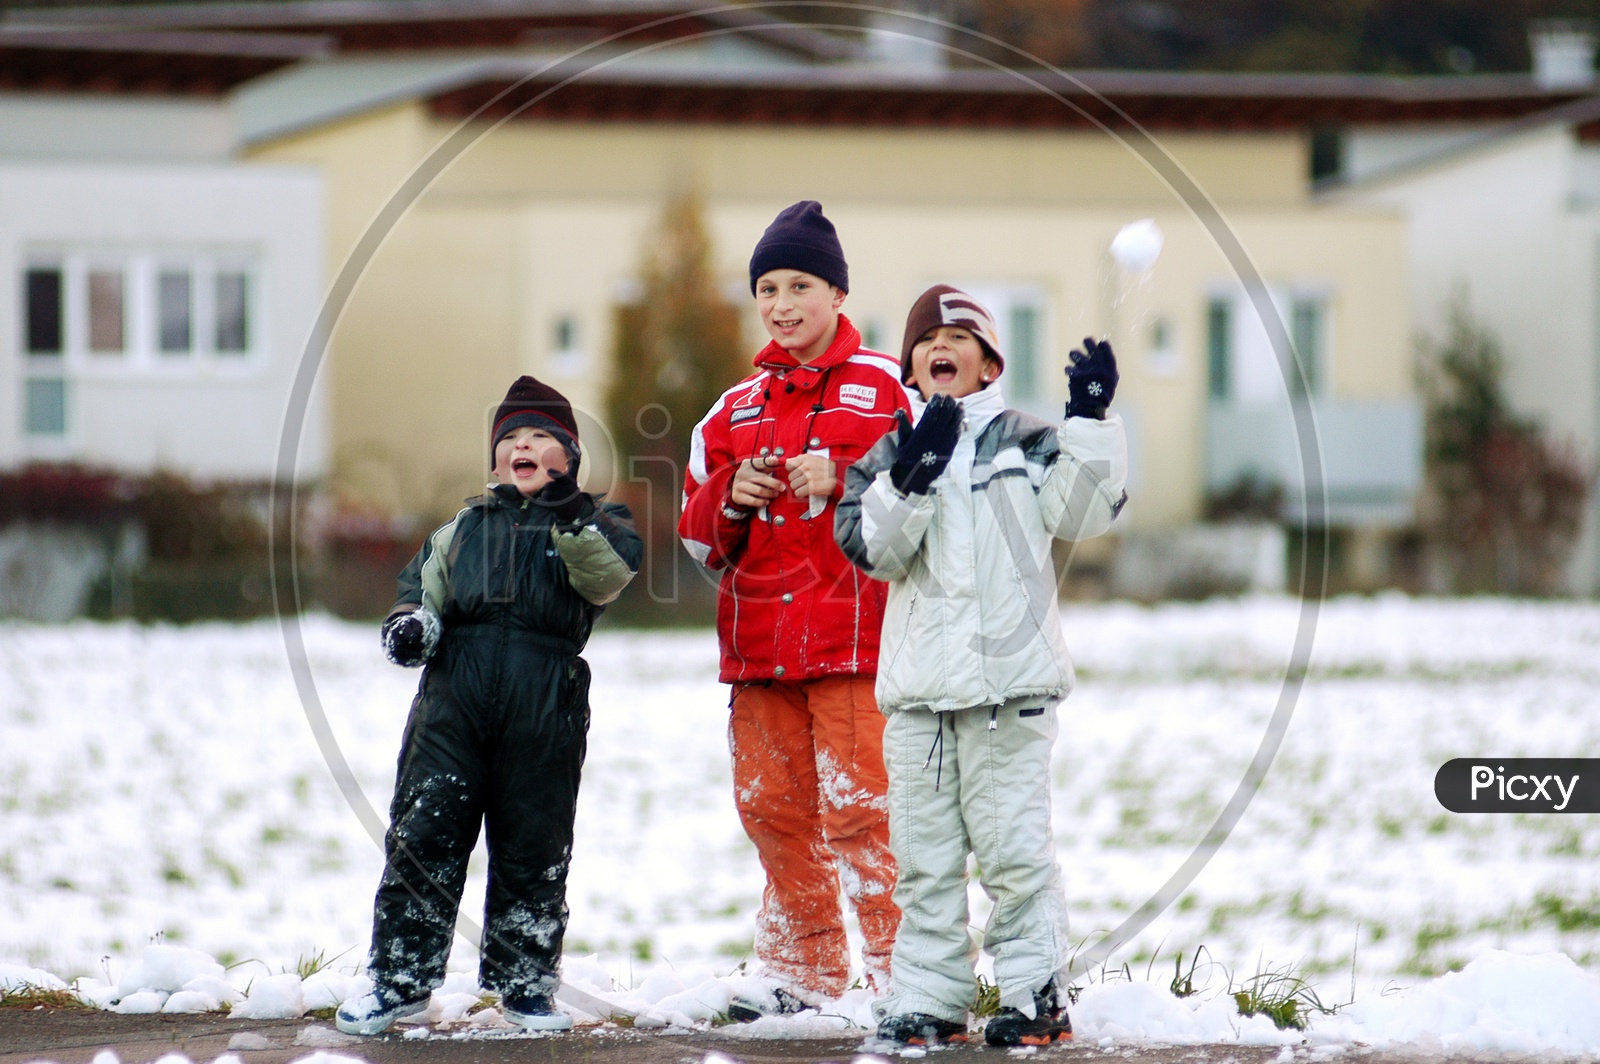 Children playing during snow